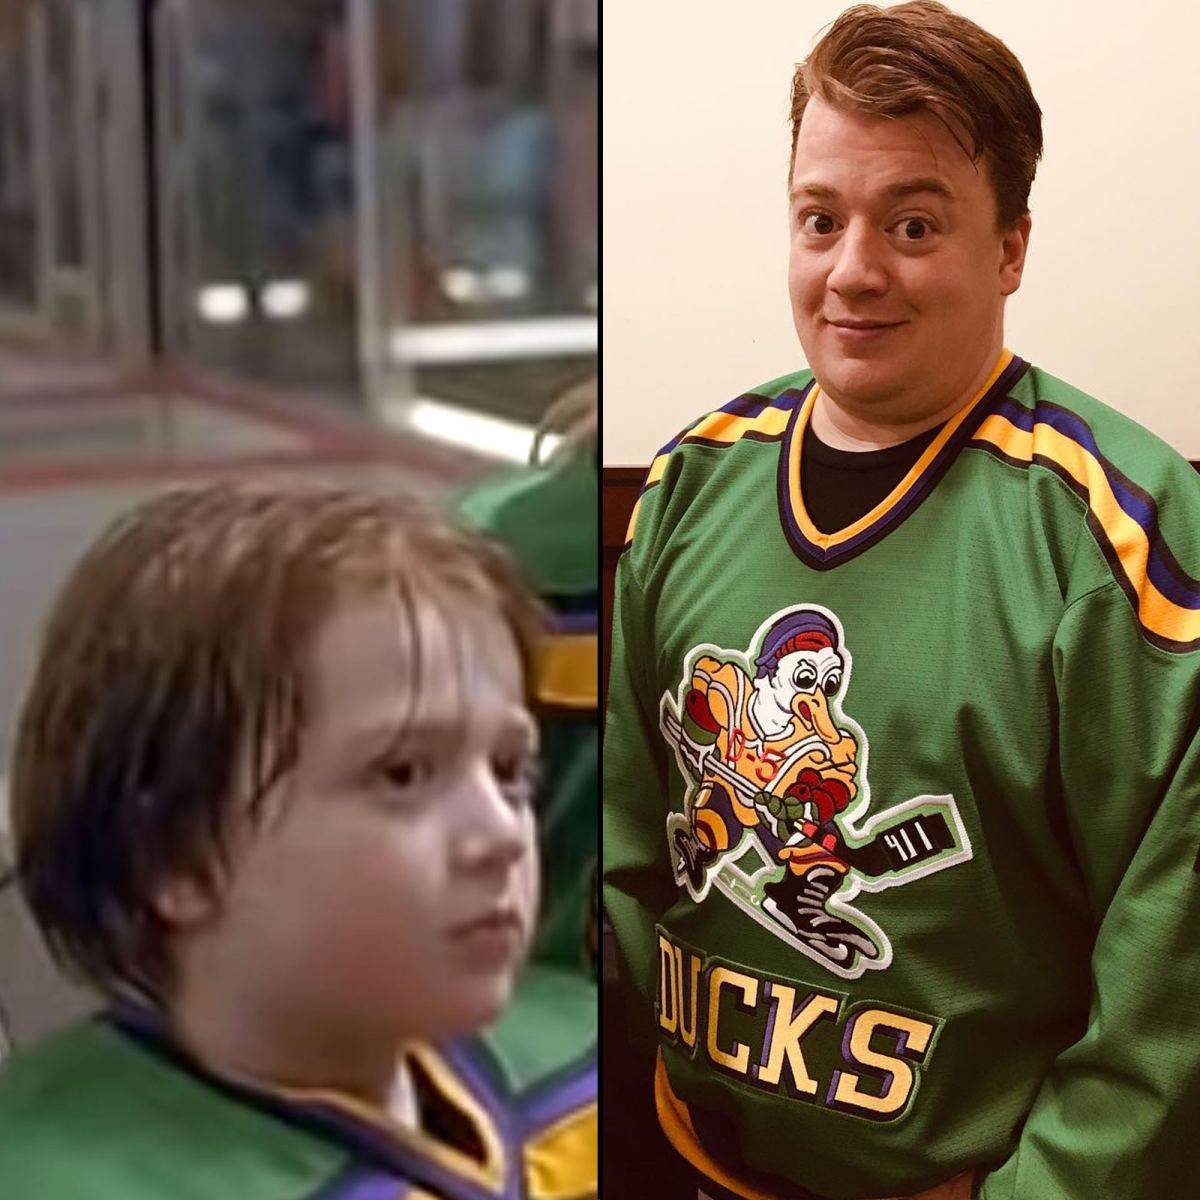 Canucks players meet cast of the Mighty Ducks movie